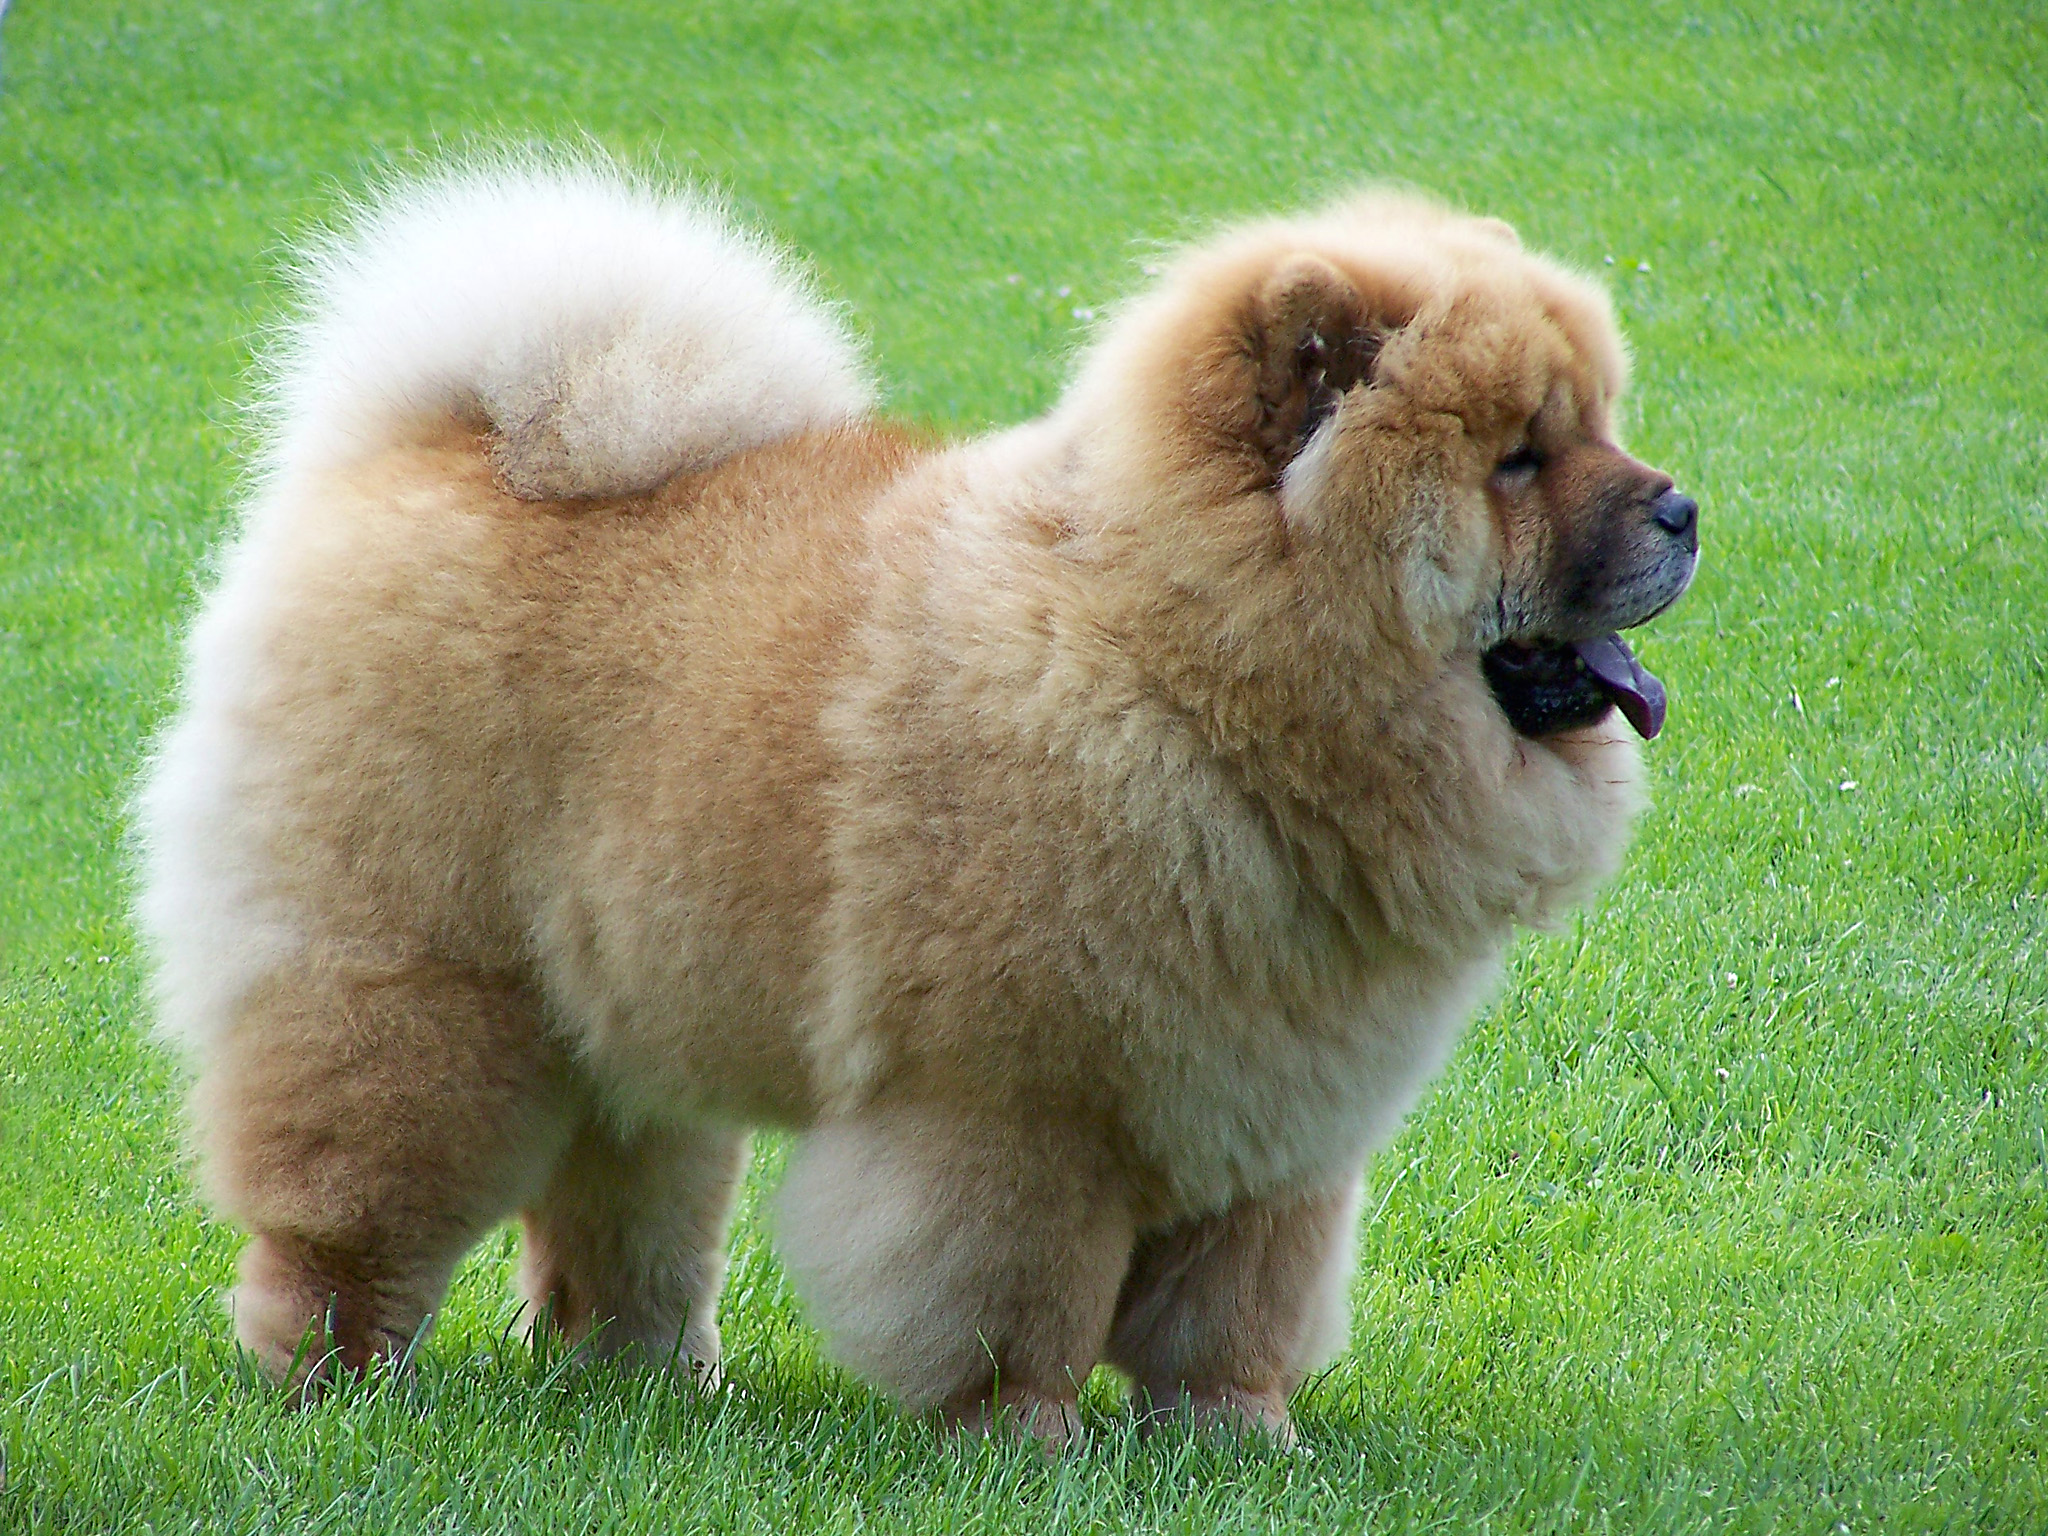 The ancient origins of the Chow Chow - BMC Series blog